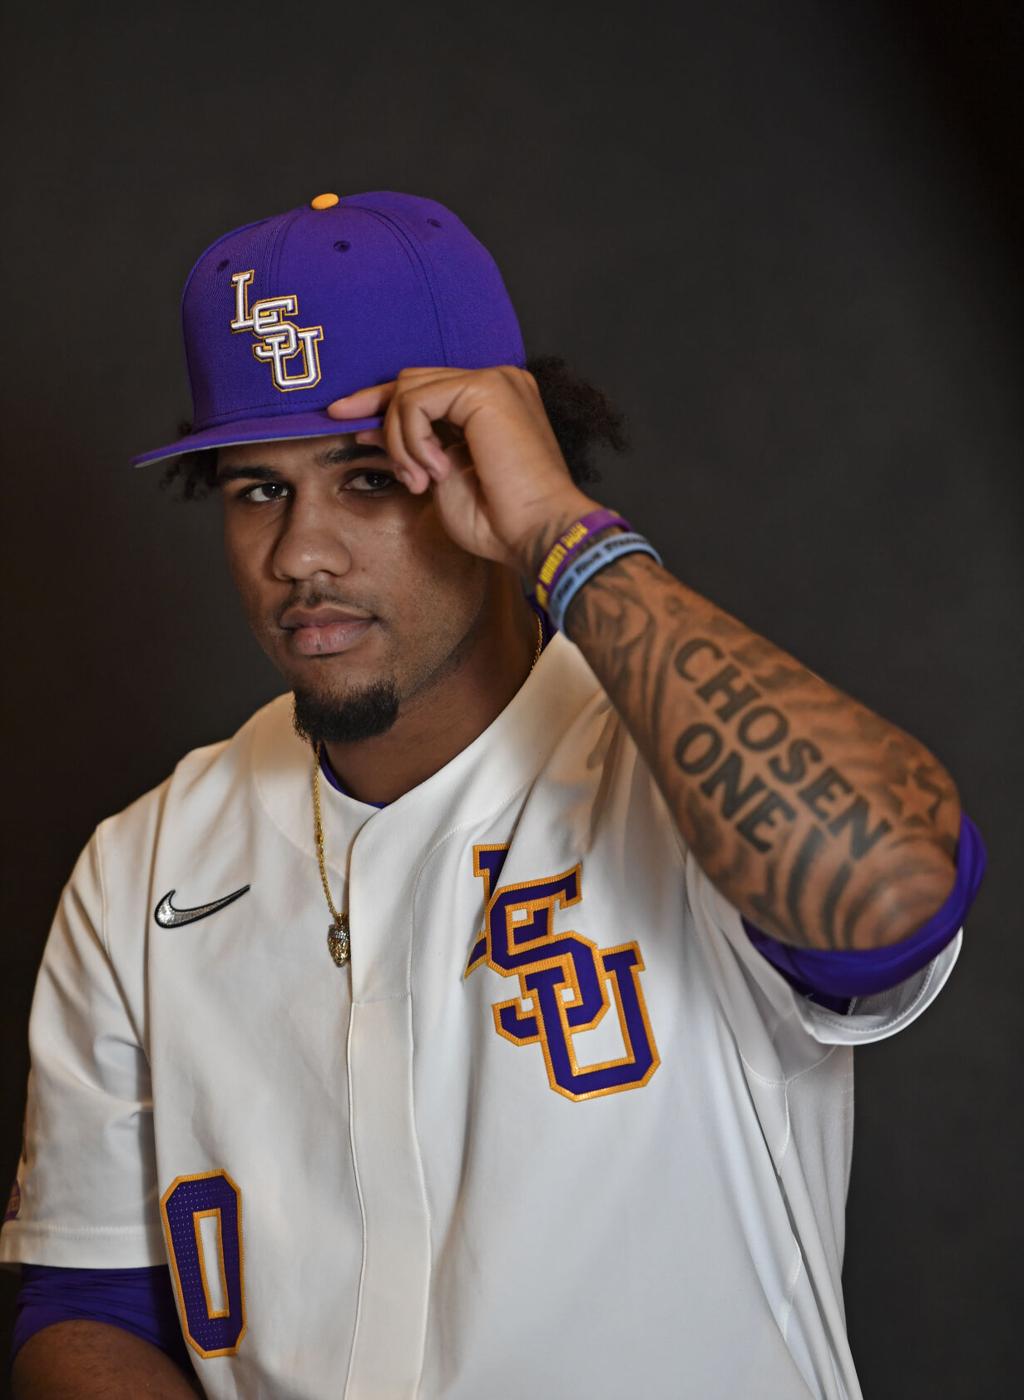 LSU's Byrd didn't look or act the part of an ace pitcher, until he took the  mound